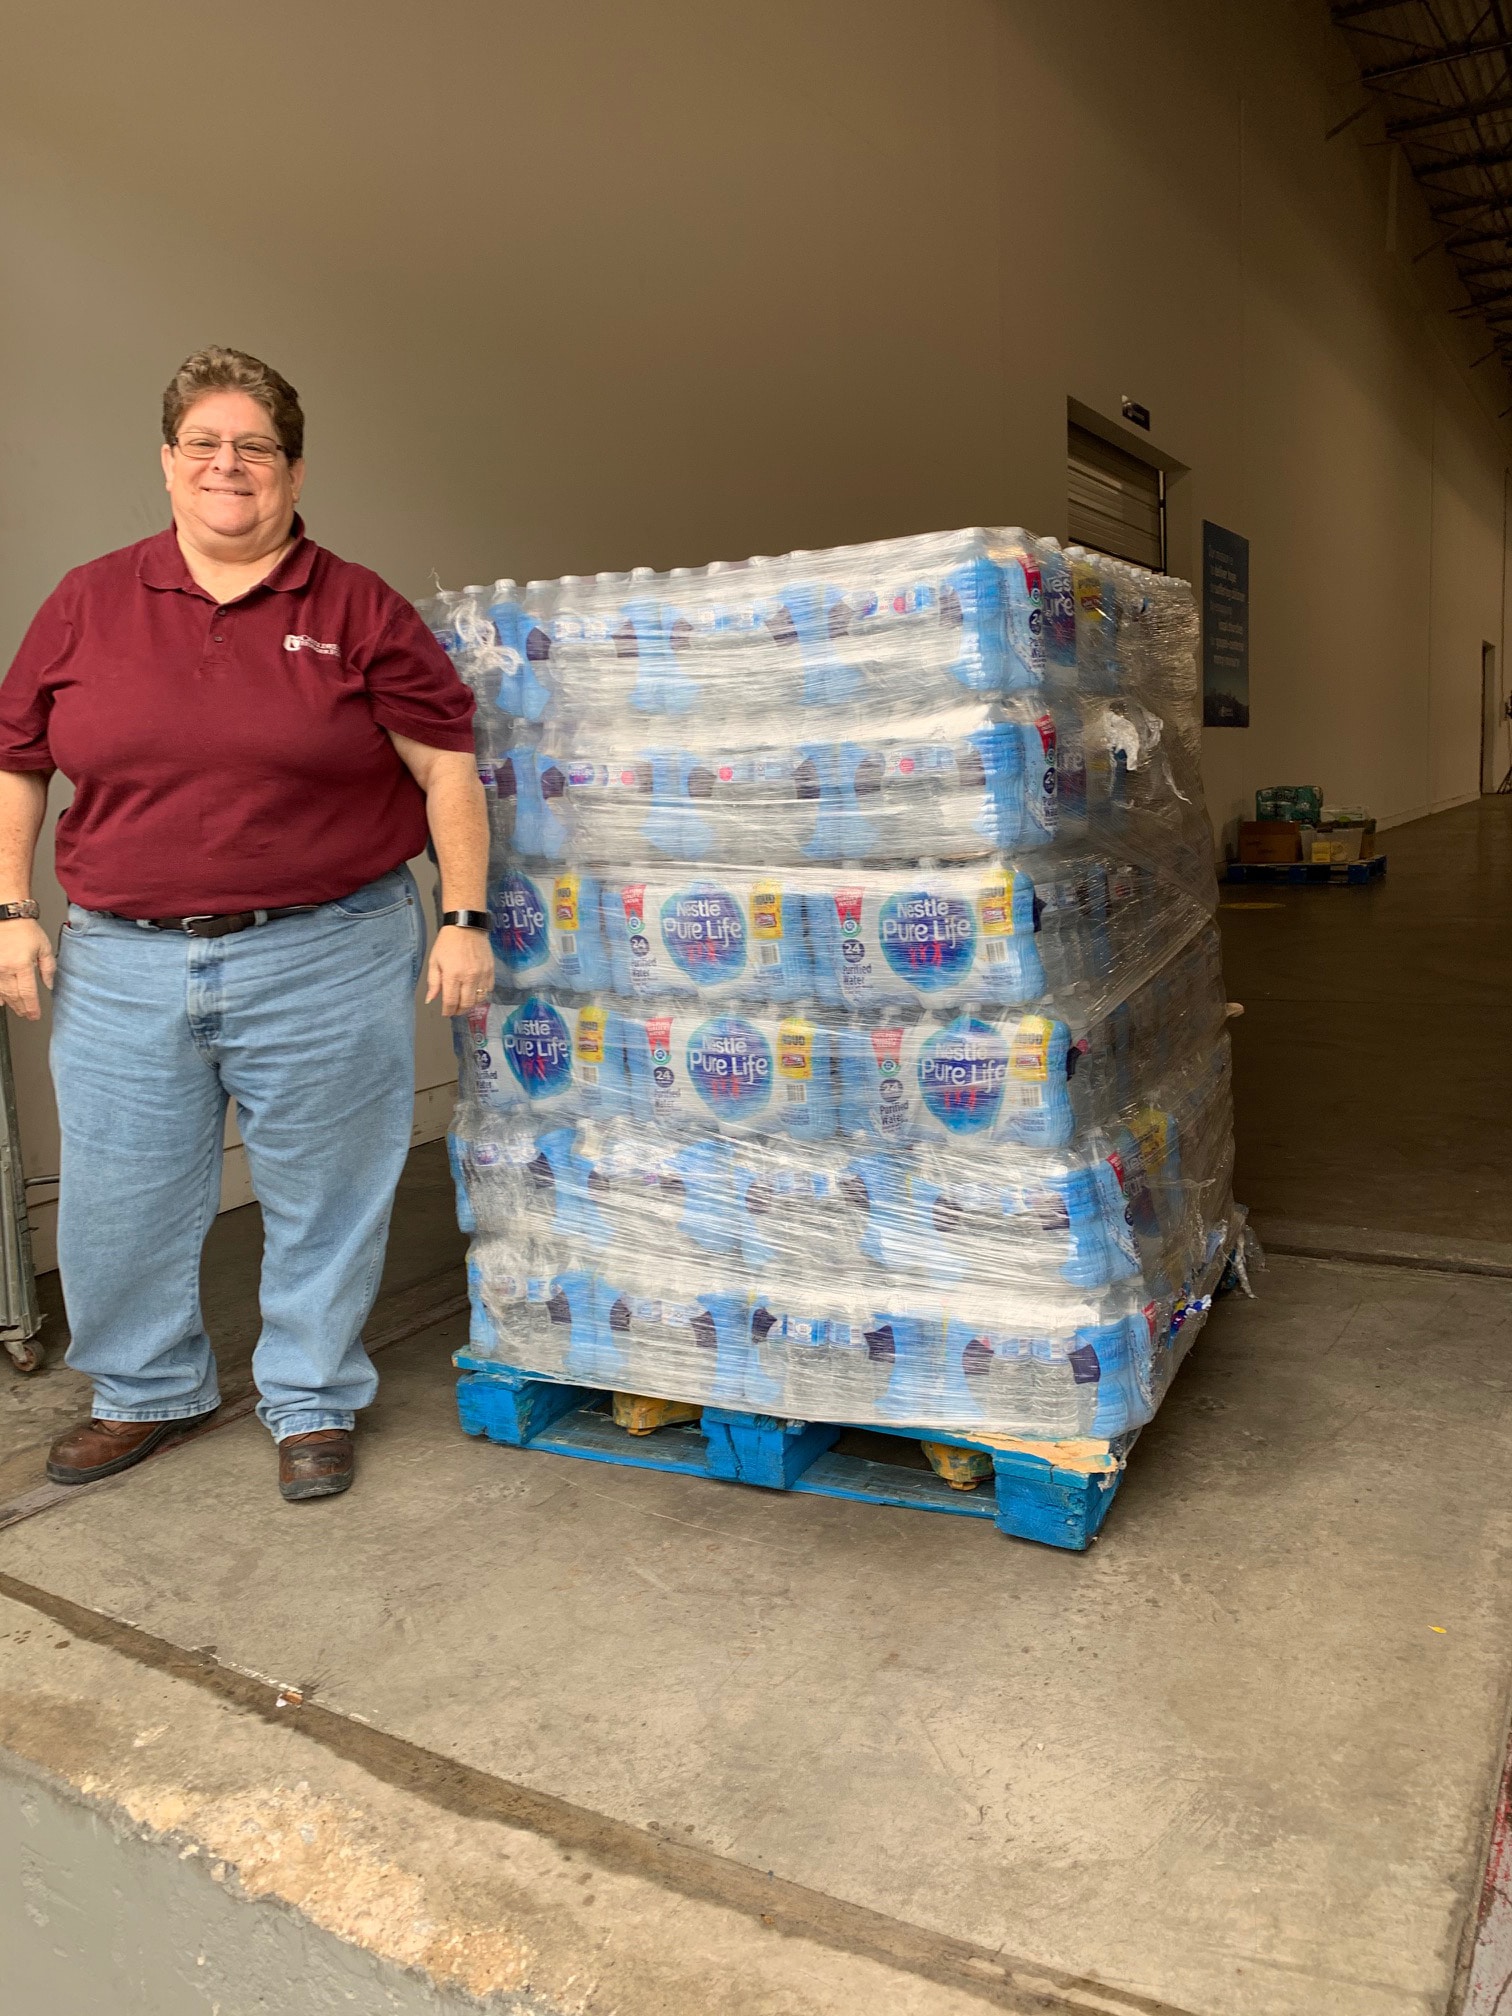 Children's Hunger Fund donated water in Dallas